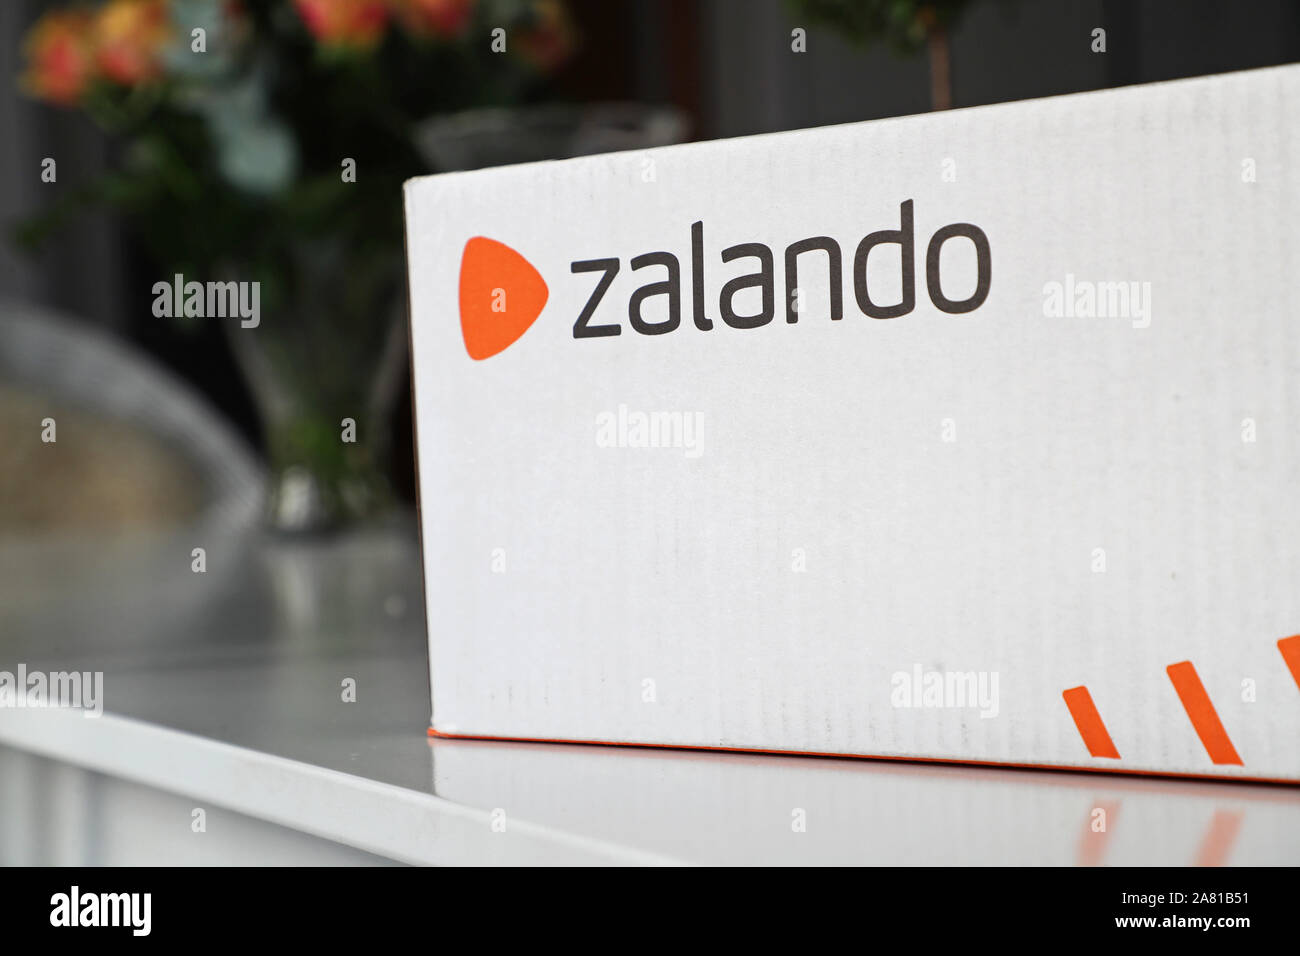 Home-delivered package from the company Zalando. Zalando is a Berlin  fashion company that sells lifestyle